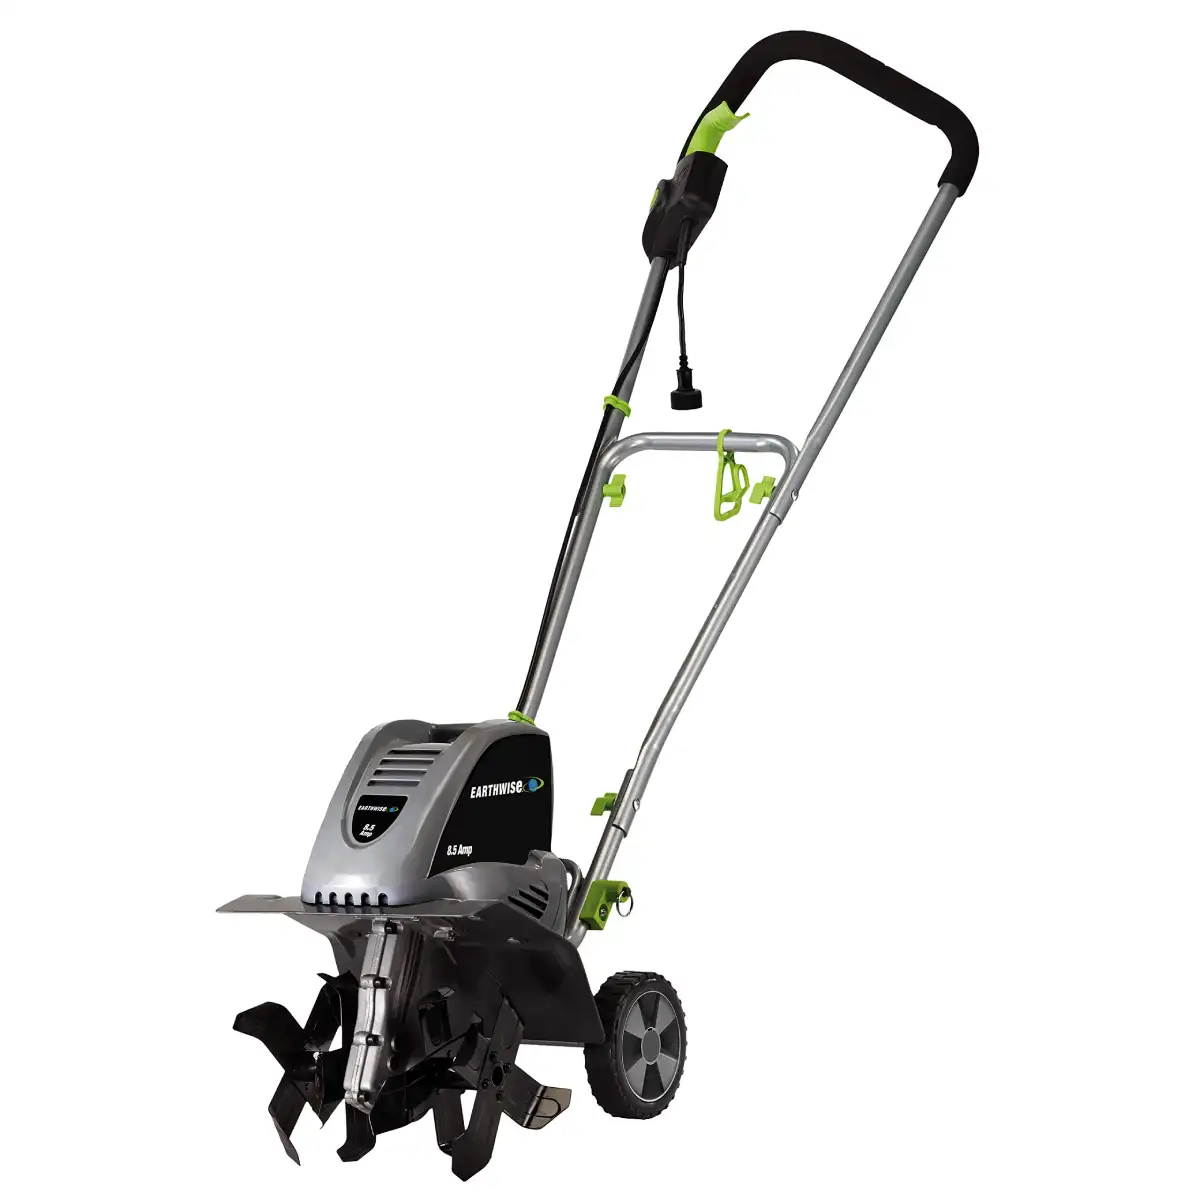 Earthwise TC70001 Electric Tiller_Cultivator